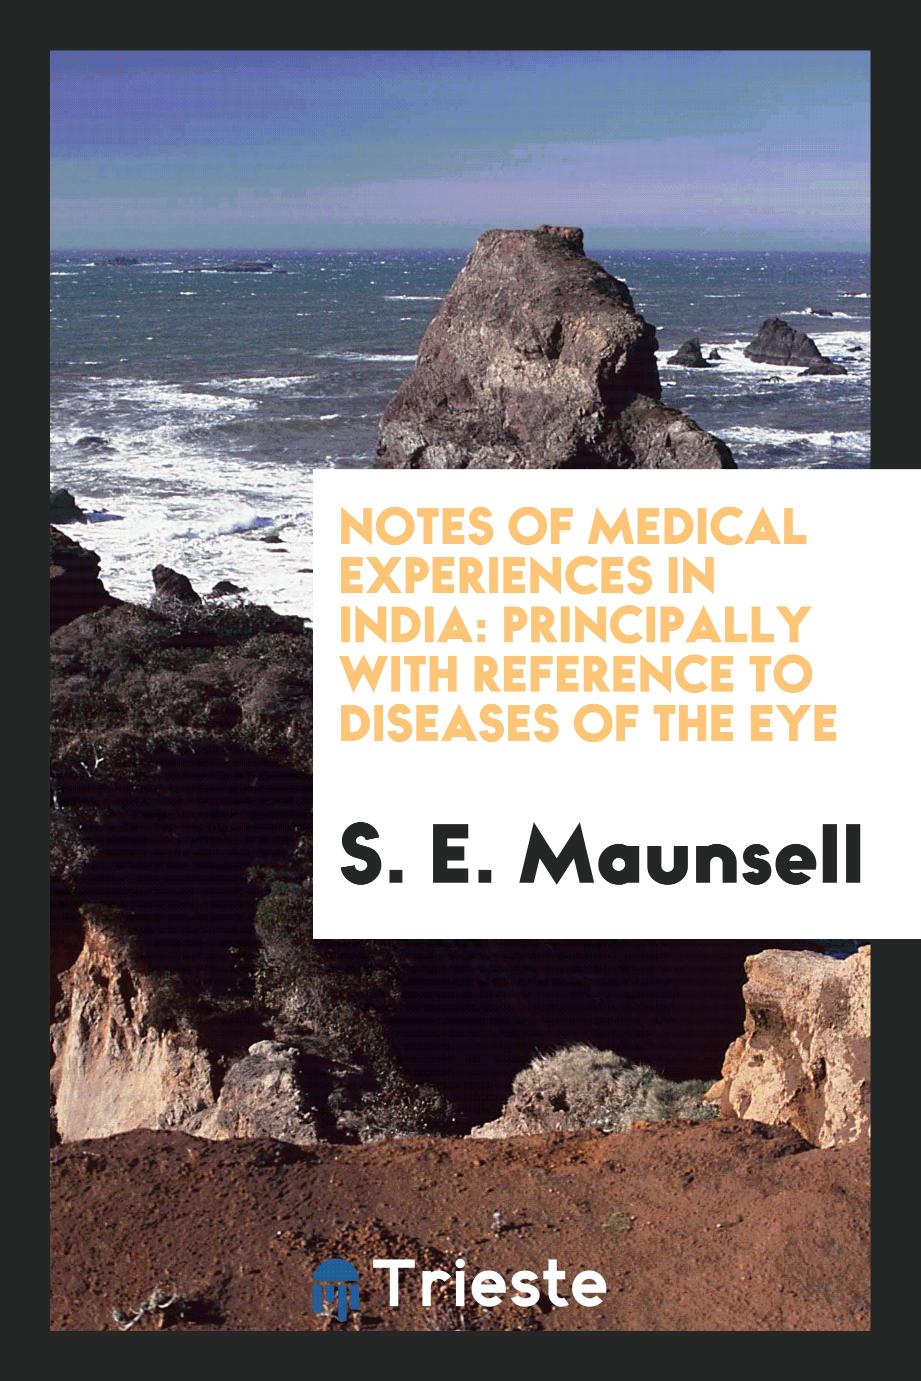 Notes of Medical Experiences in India: Principally with Reference to Diseases of the Eye